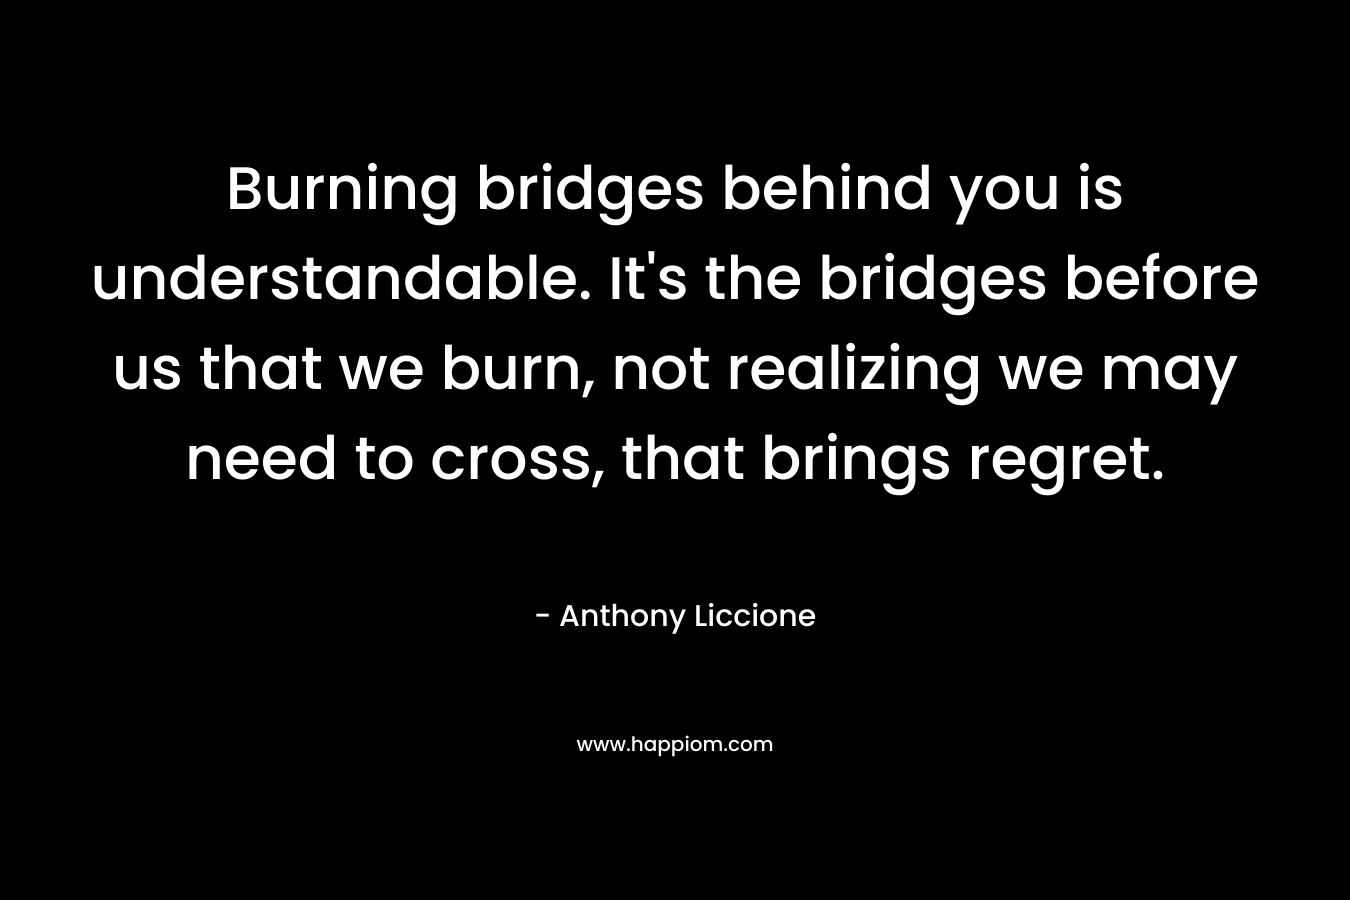 Burning bridges behind you is understandable. It's the bridges before us that we burn, not realizing we may need to cross, that brings regret.